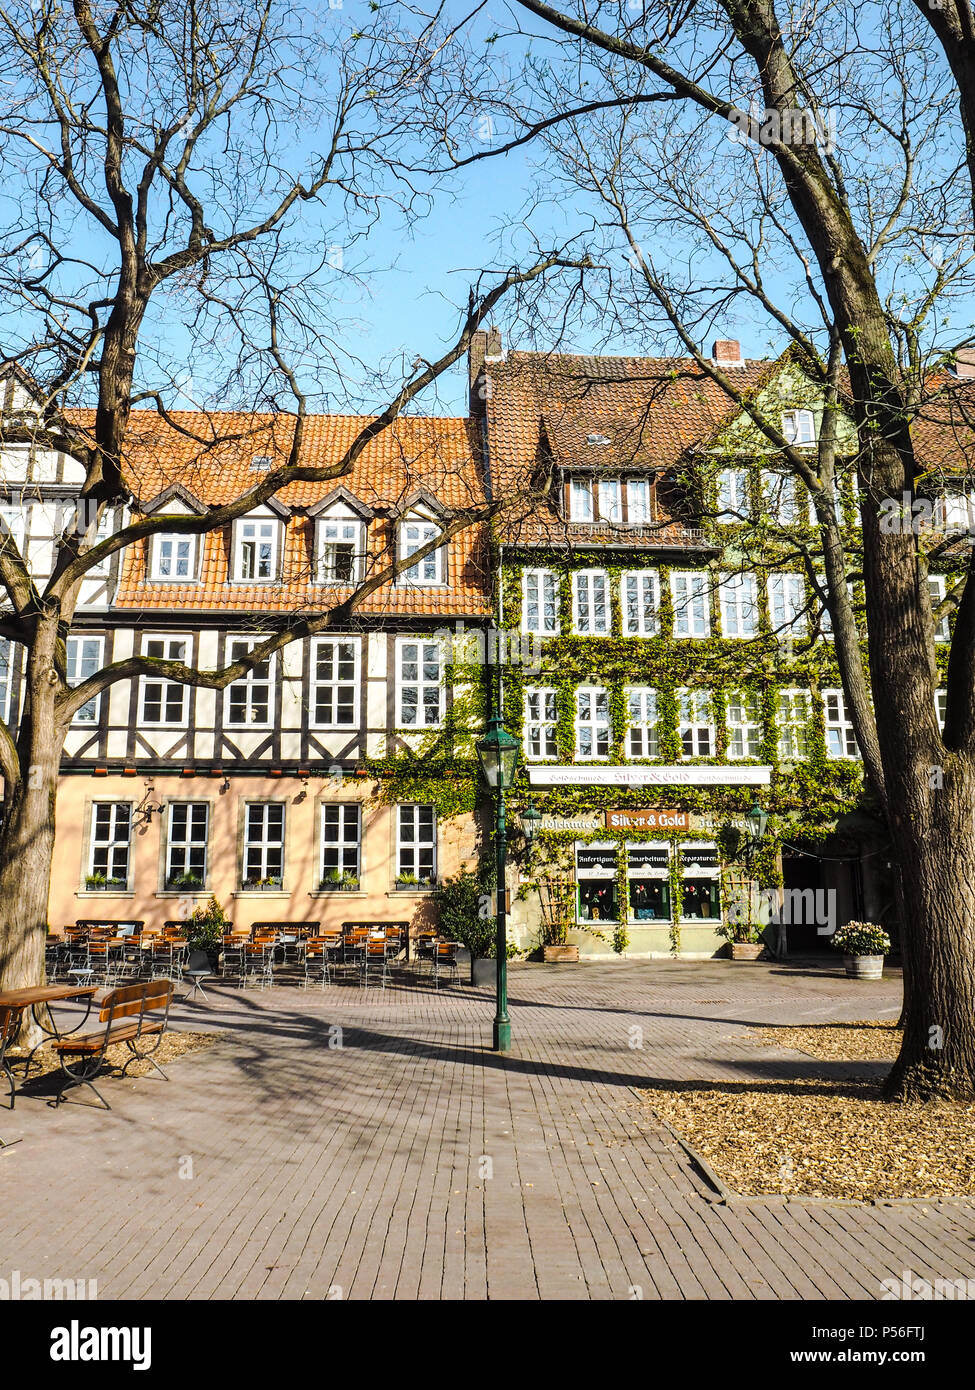 Traditional half-timbered buildings at the Ballhofplatz square in the old town and city center of Hannover Germany Stock Photo